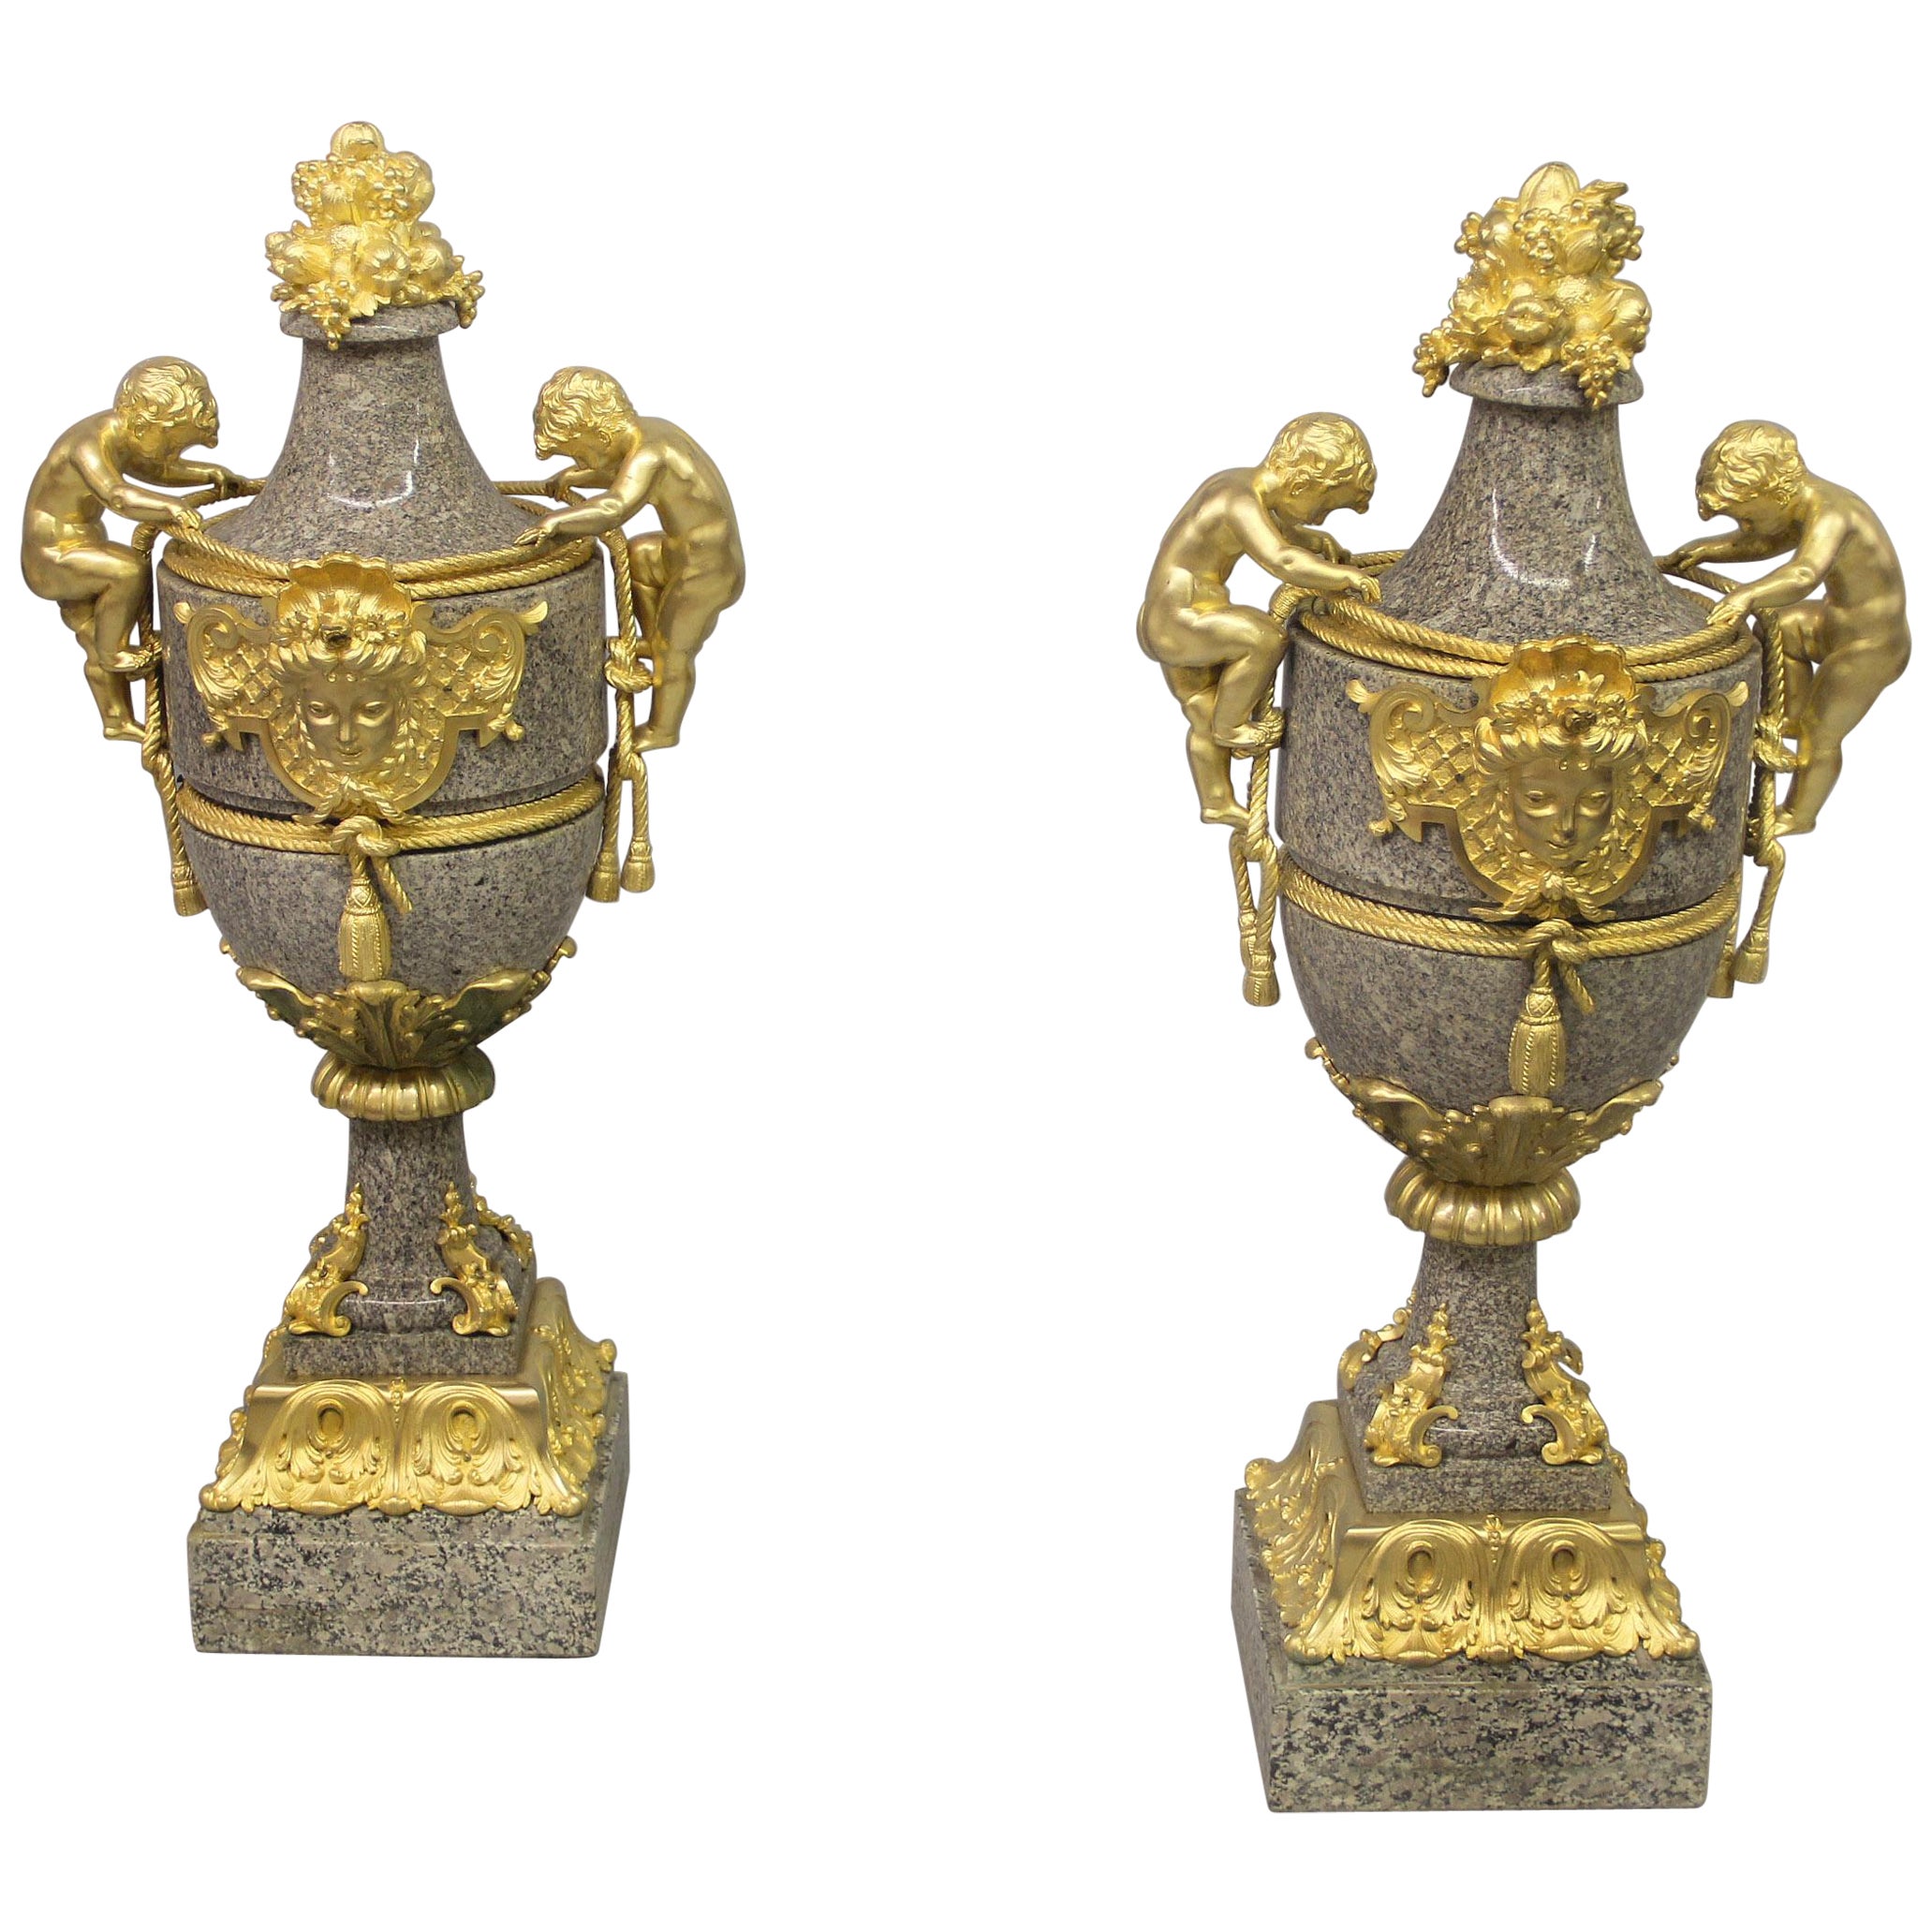 Excellent Quality Pair of Large 19th Century Gilt Bronze Mounted Granite Vases